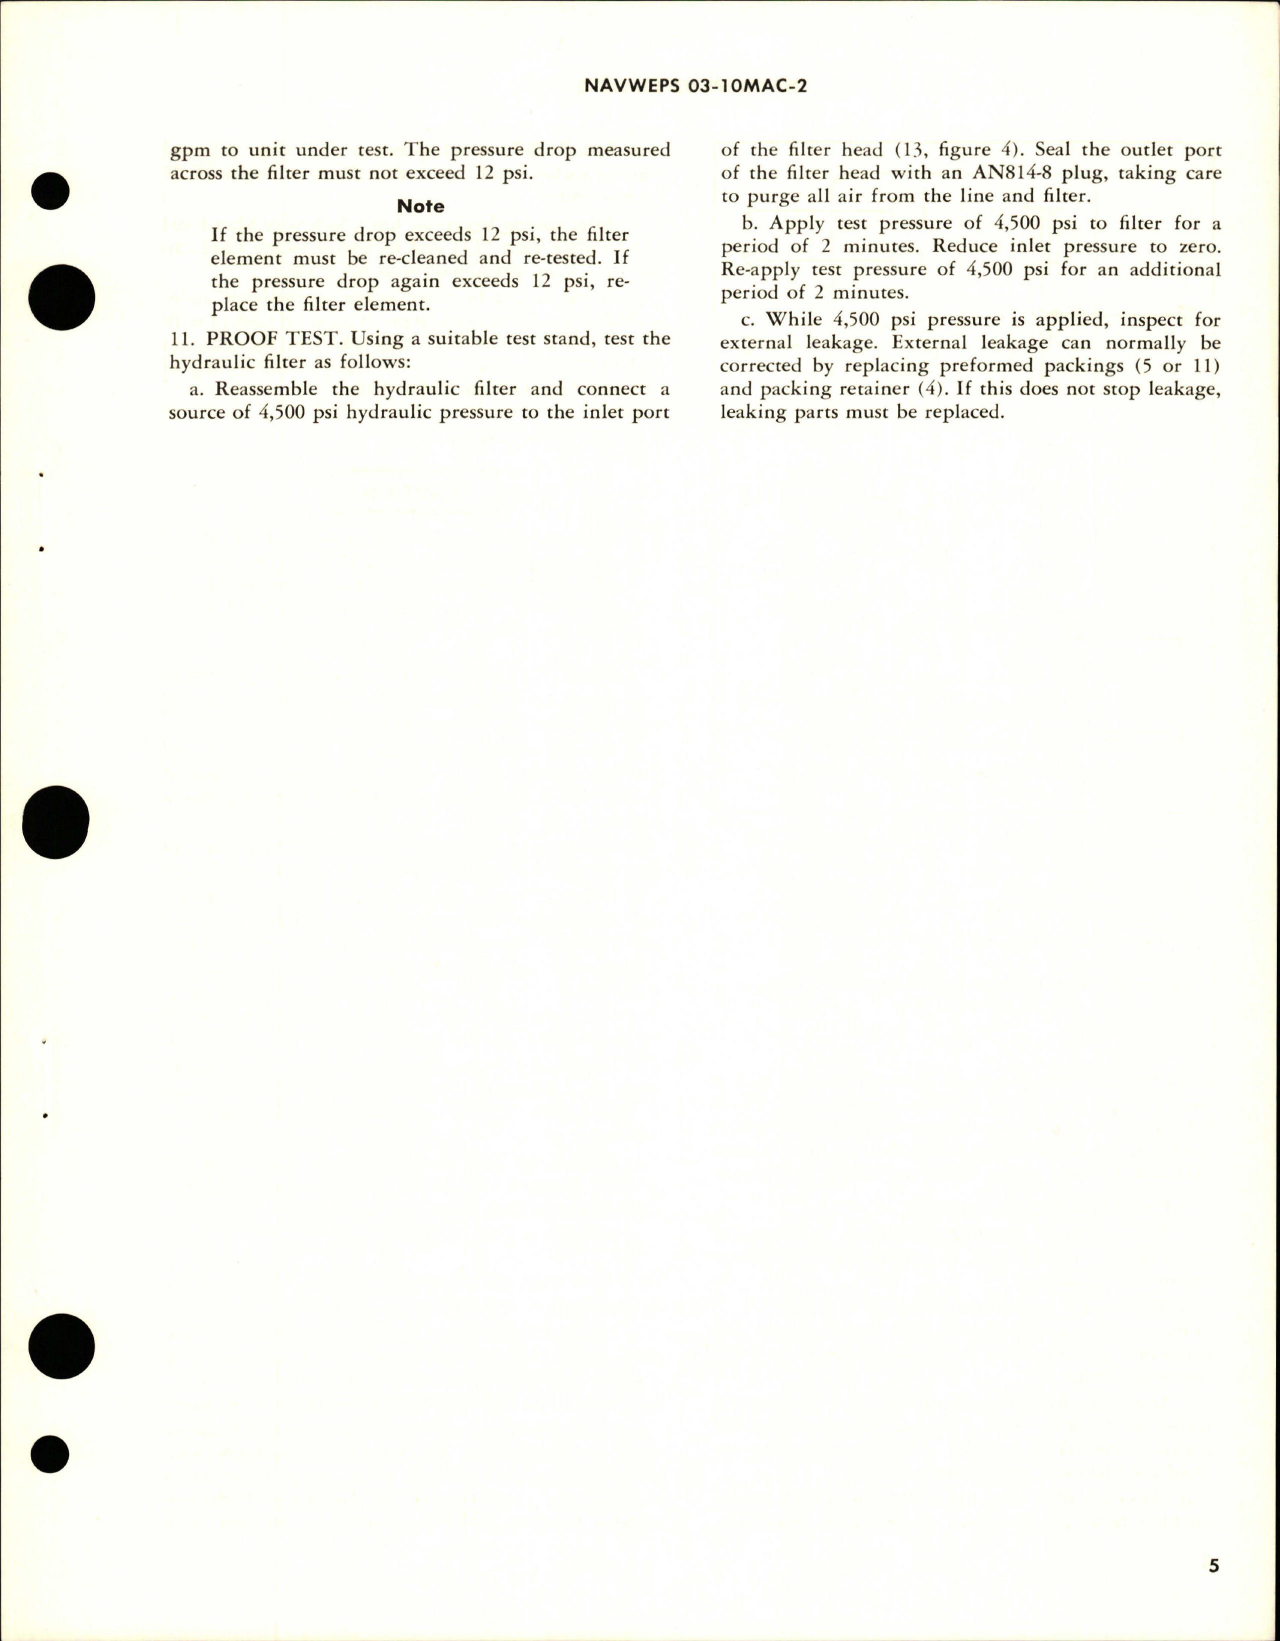 Sample page 5 from AirCorps Library document: Overhaul Instructions with Parts Breakdown for Hydraulic Filter - Part AC-2061-8 